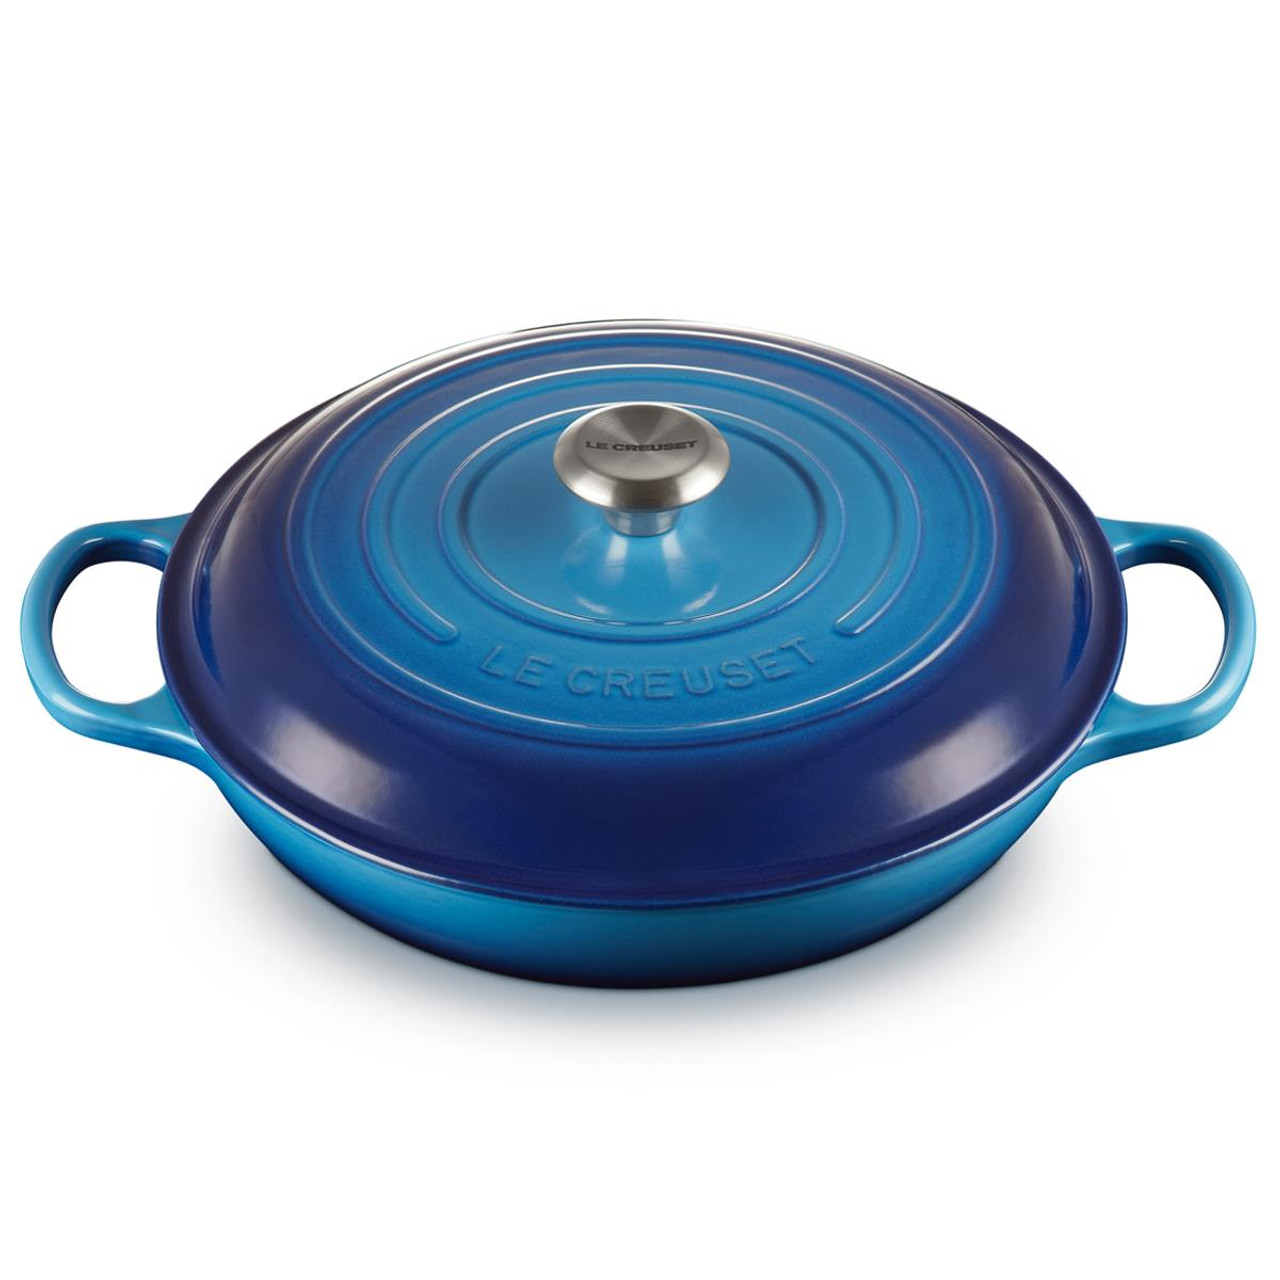 Can I put a Le Creuset Casserole Dish in the oven?